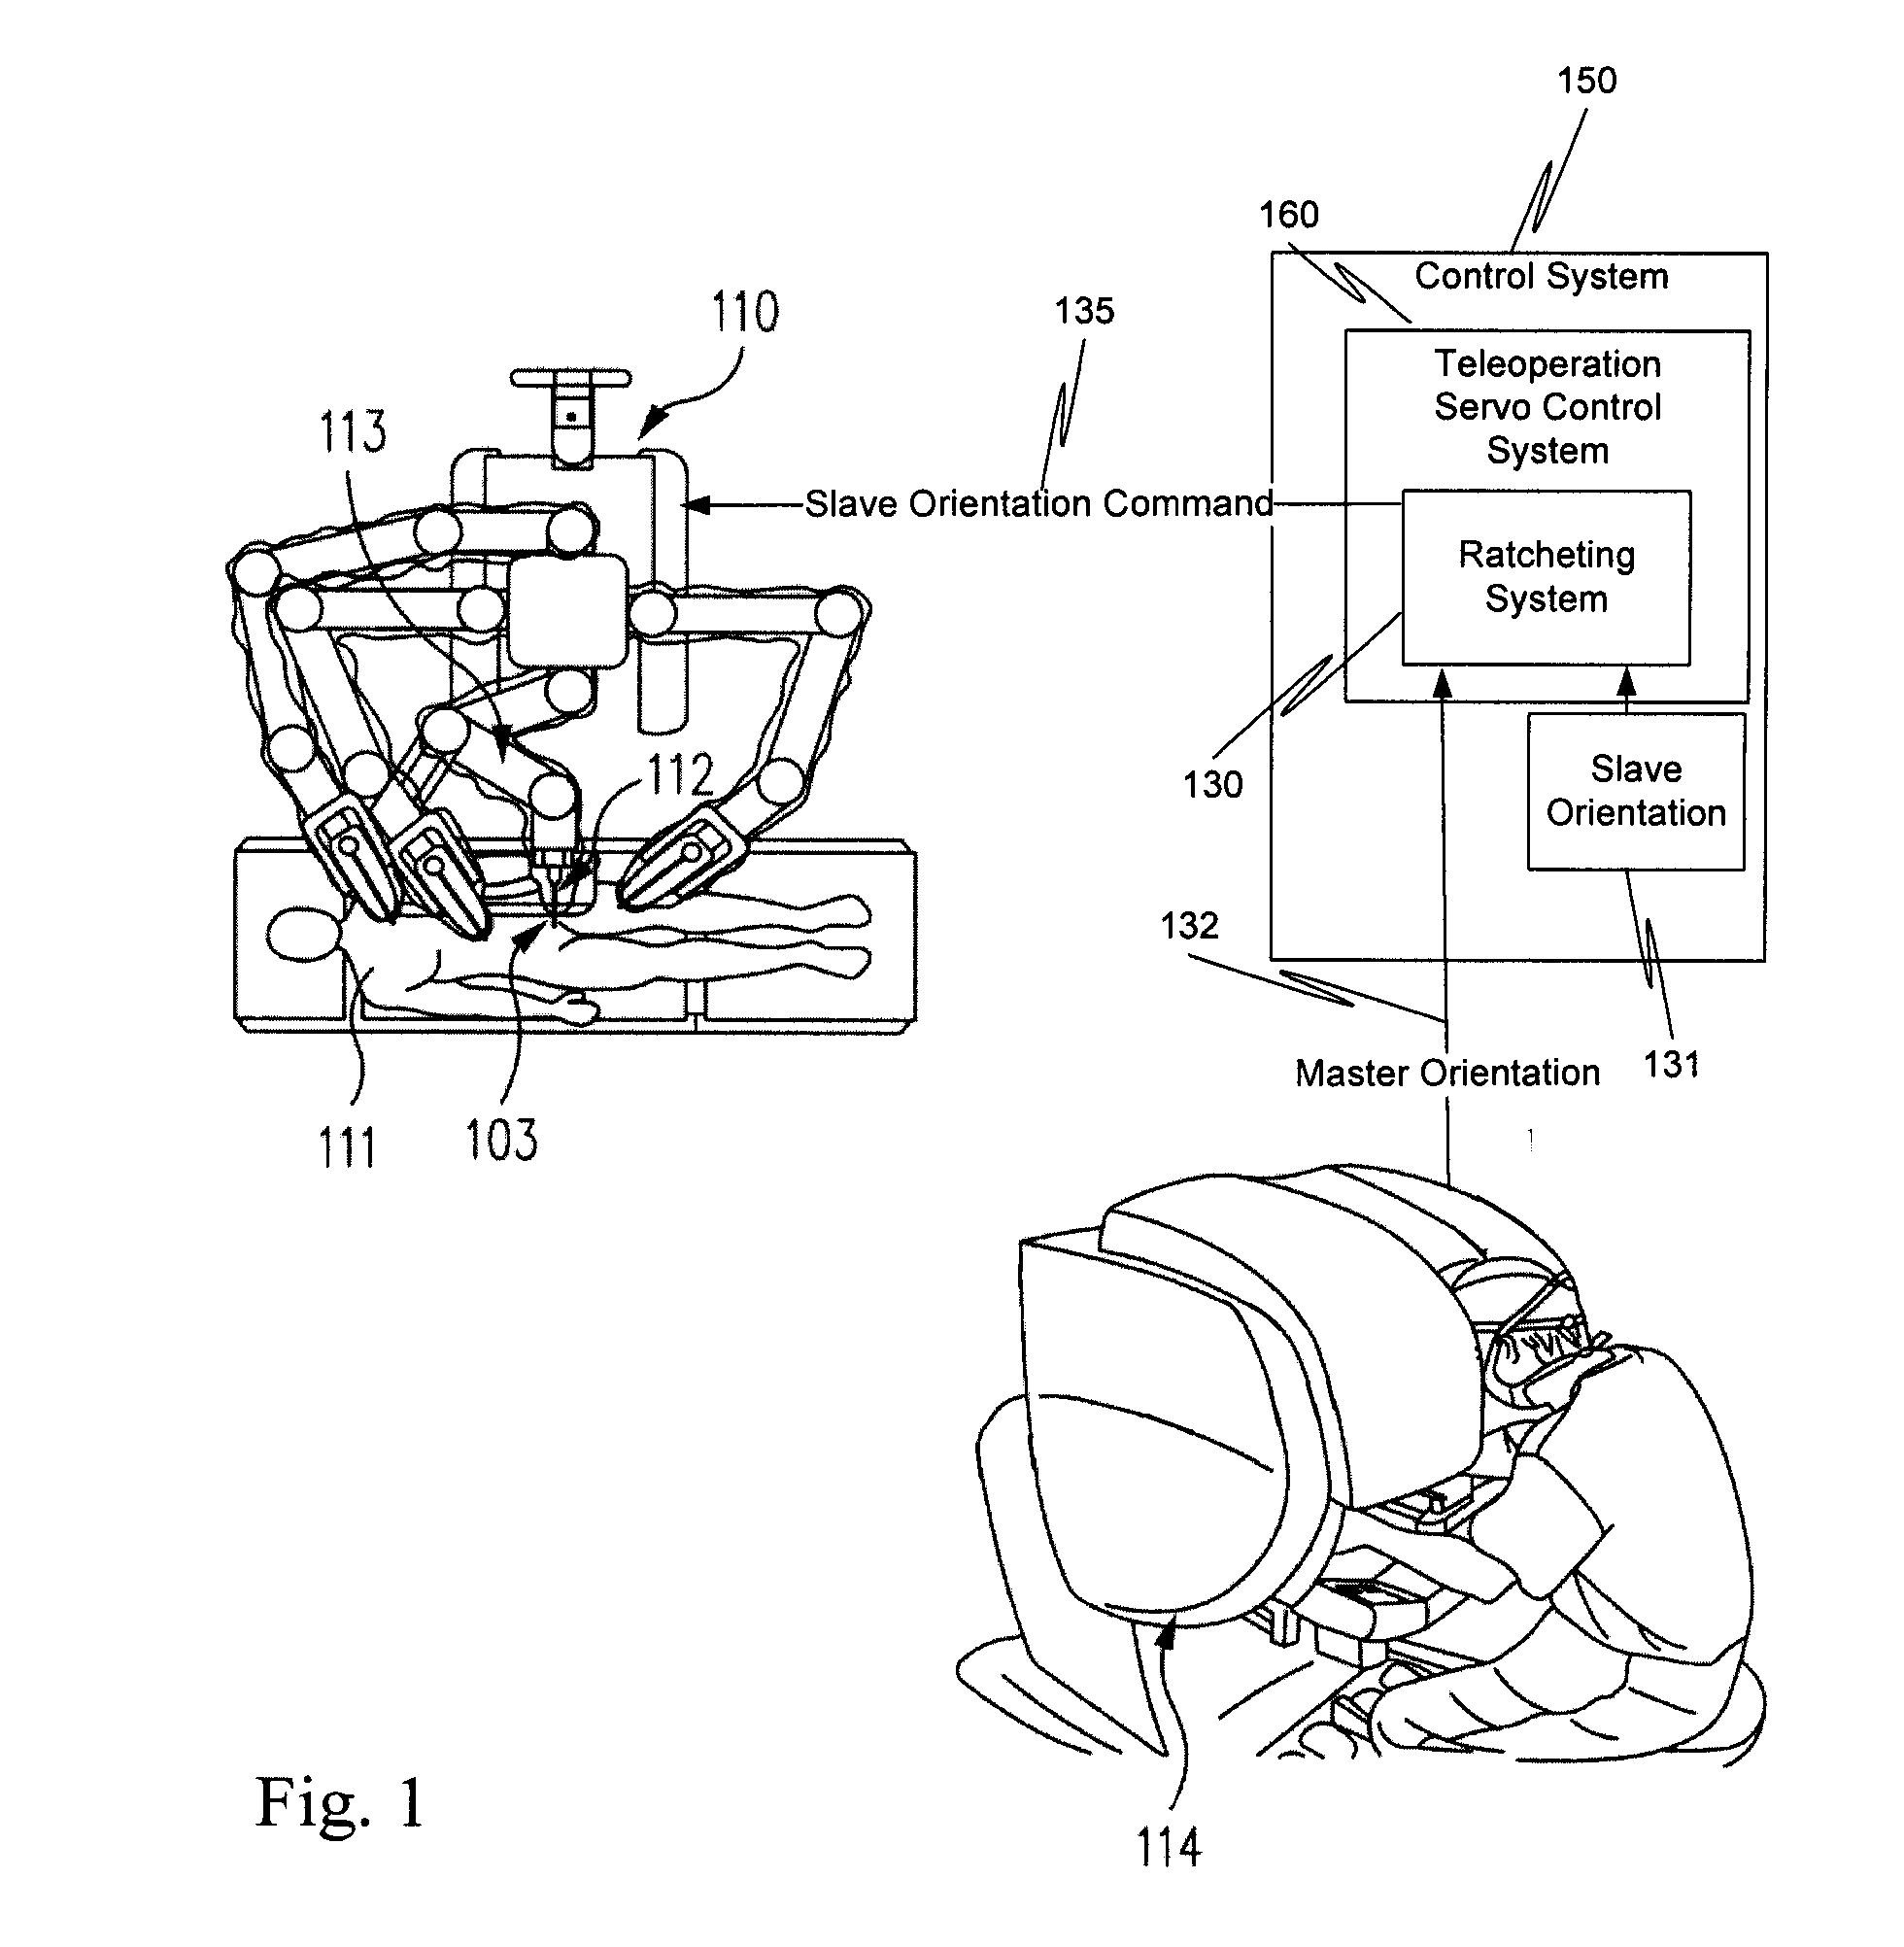 Ratcheting for master alignment of a teleoperated minimally-invasive surgical instrument